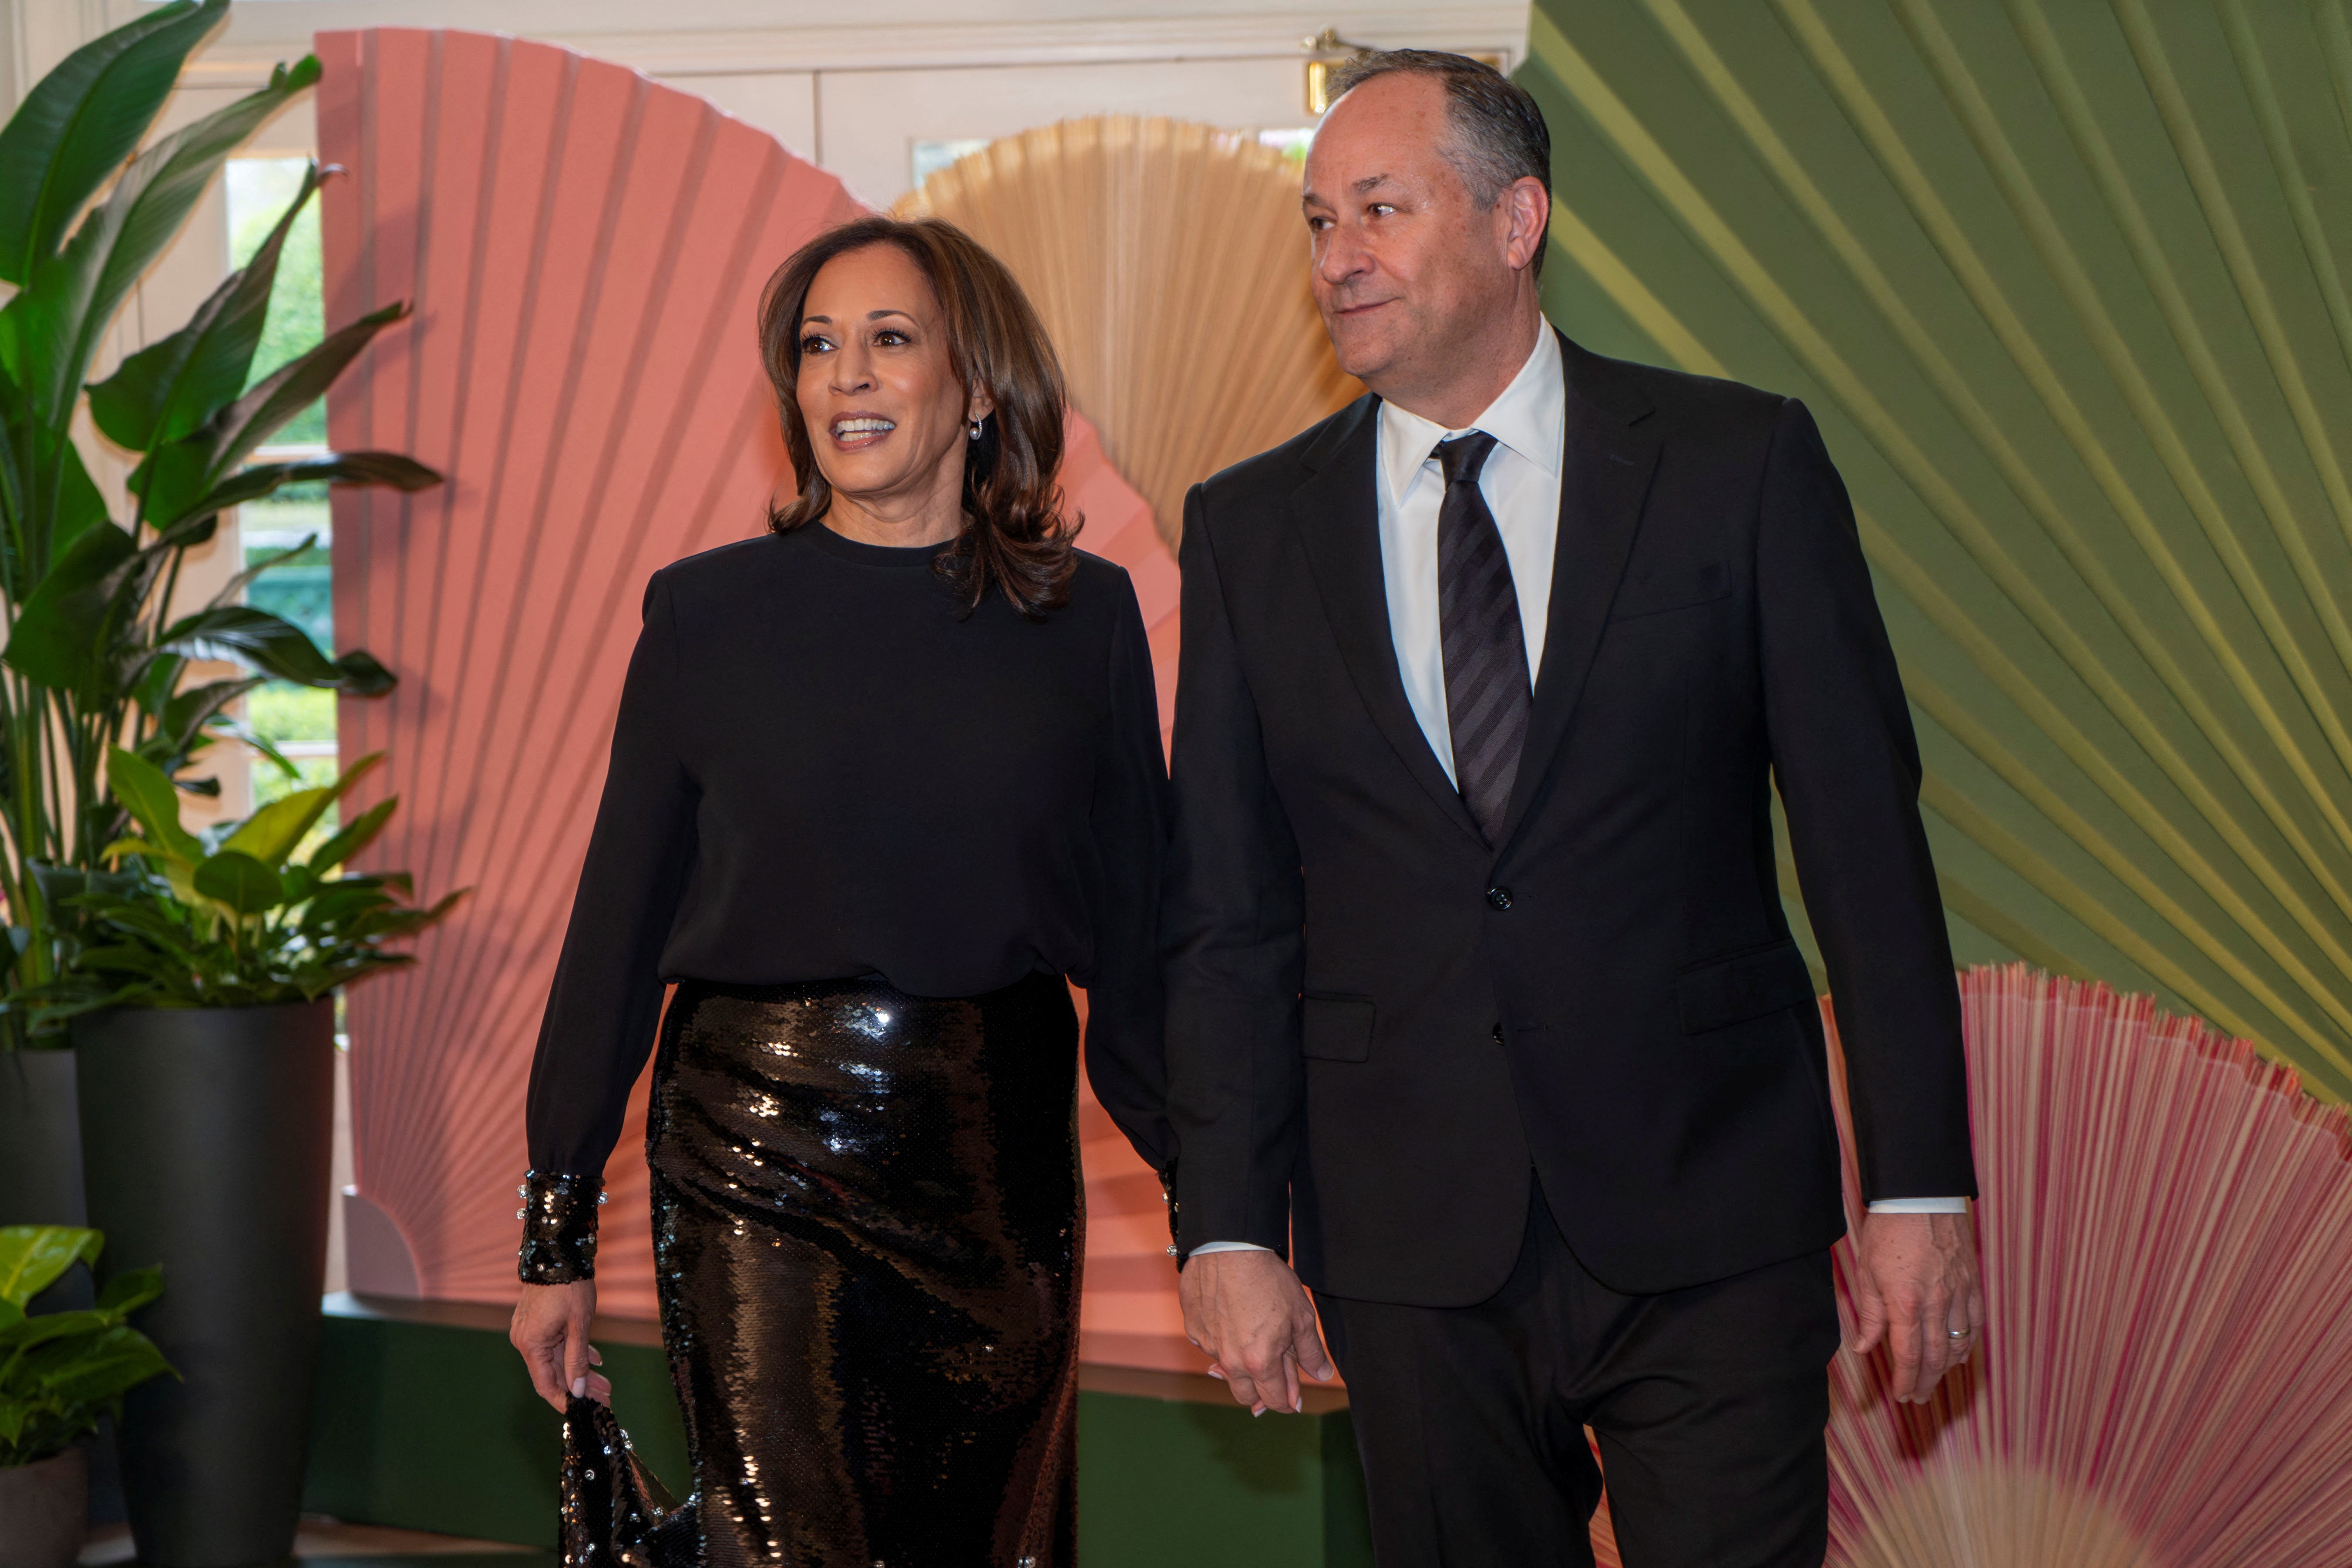 Harris and Second Gentleman Doug Emhoff arrive for a state dinner earlier this year